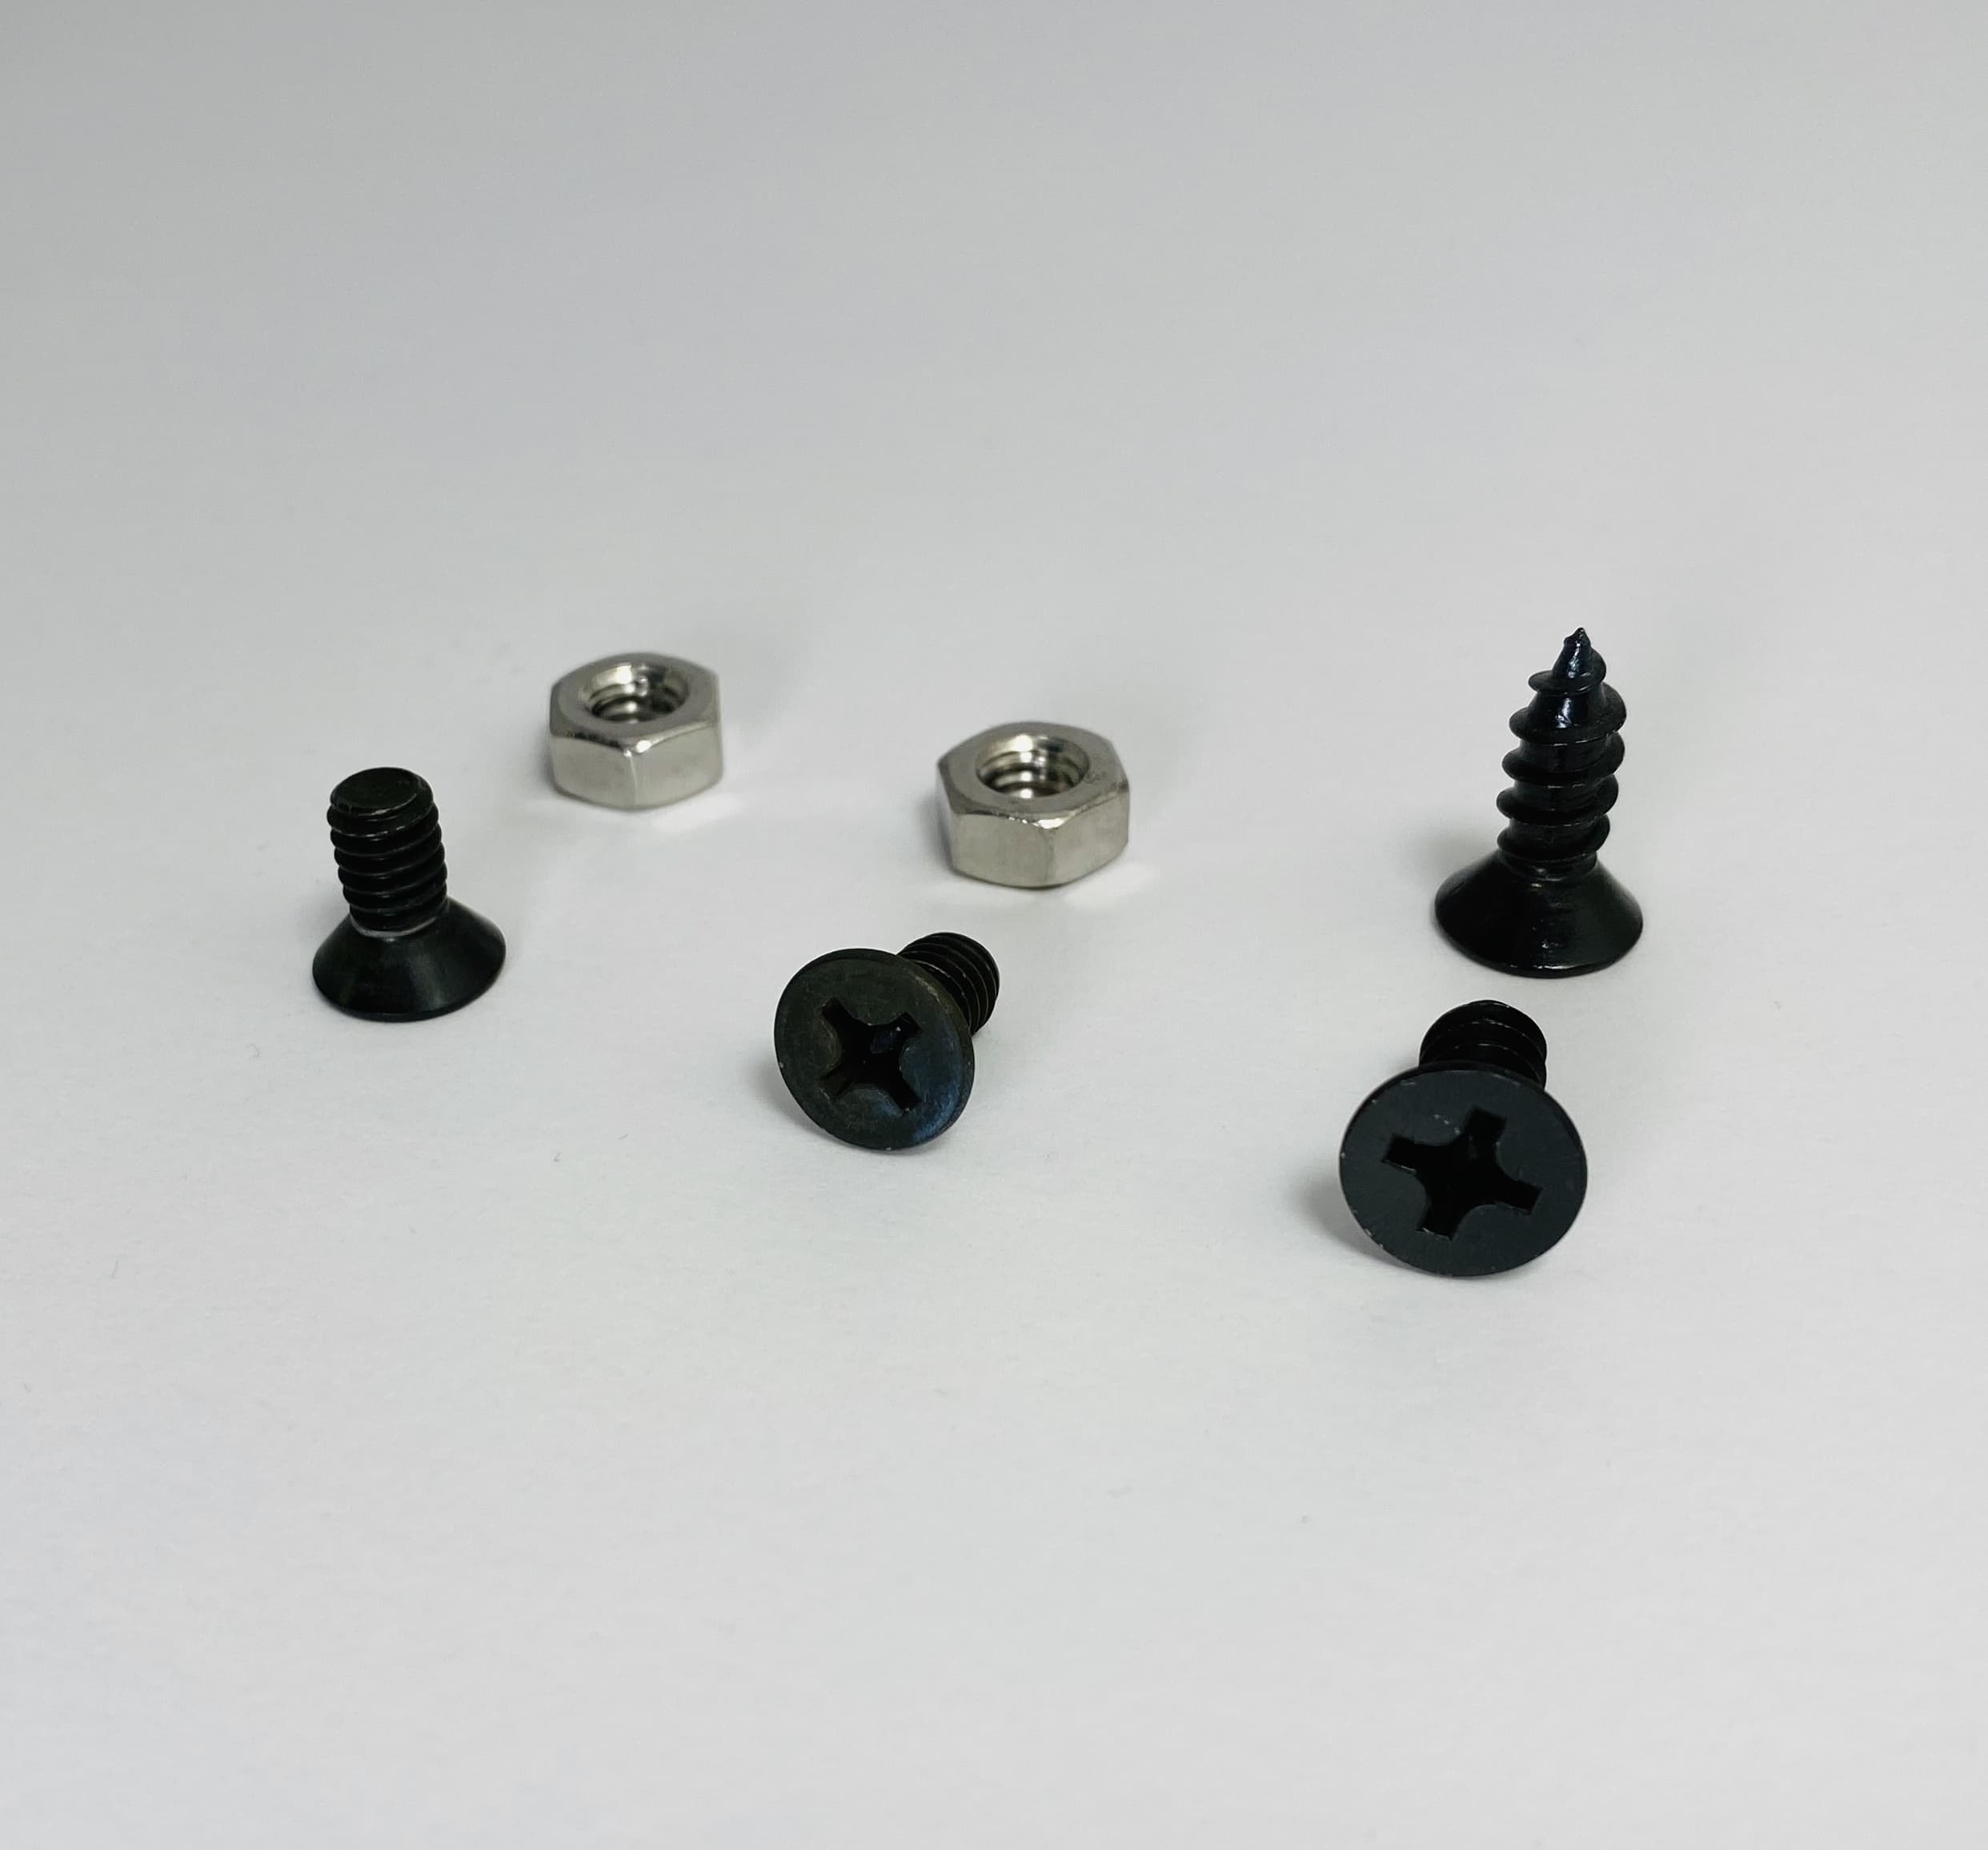 Stainless steel screws - Black (for CNC frames only)